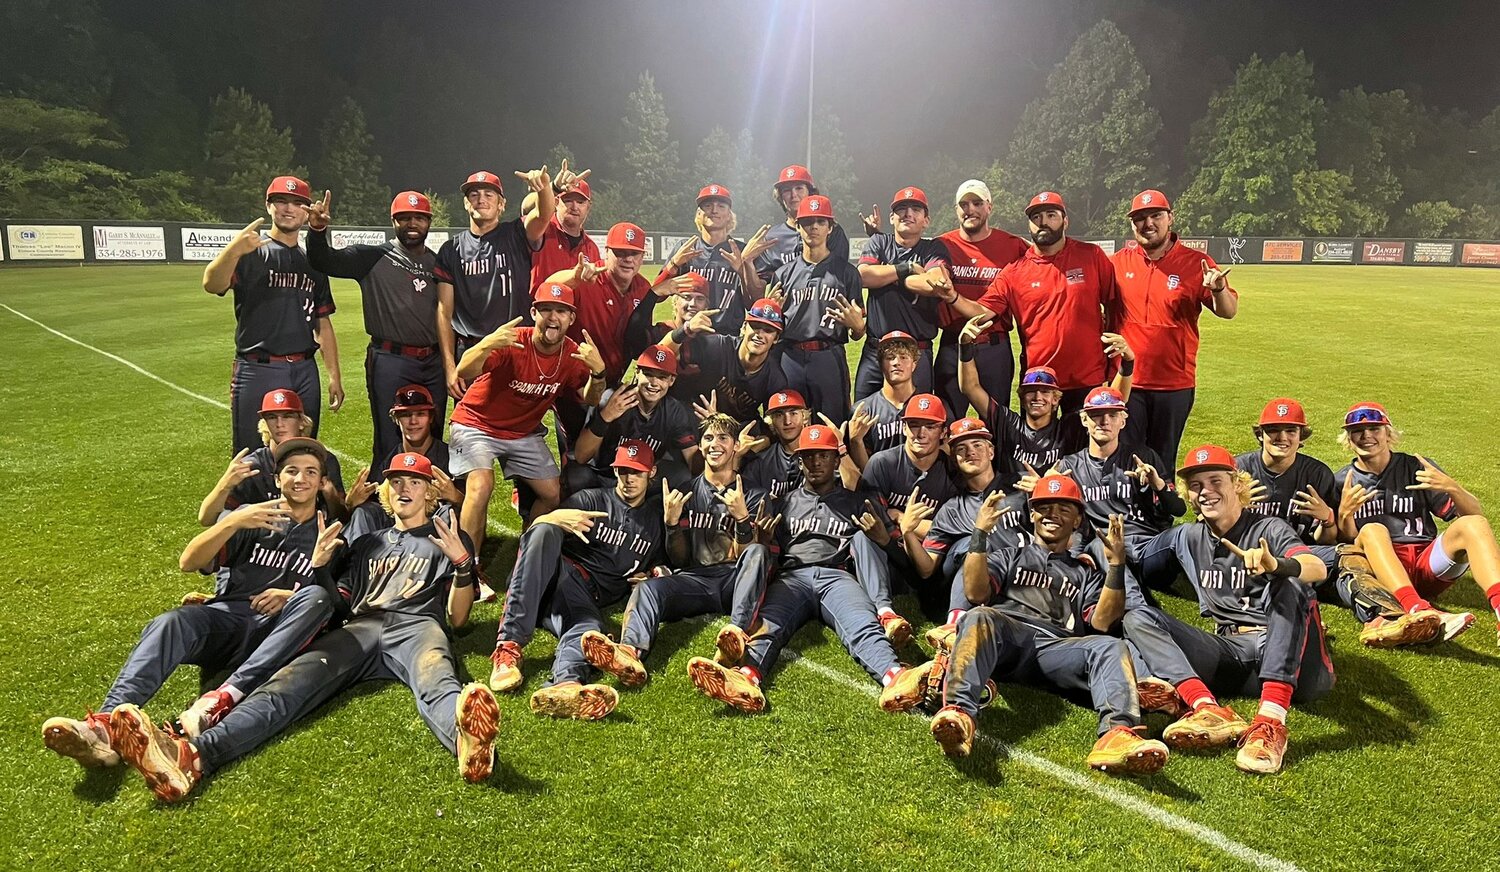 The Spanish Fort Toros celebrate their championship berth following a 9-6 win in Game 3 of the Class 6A state semifinal series against the Stanhope Elmore Mustangs Thursday, May 11. Spanish Fort was set to take on Oxford in its first trip to the championship series since 2014.